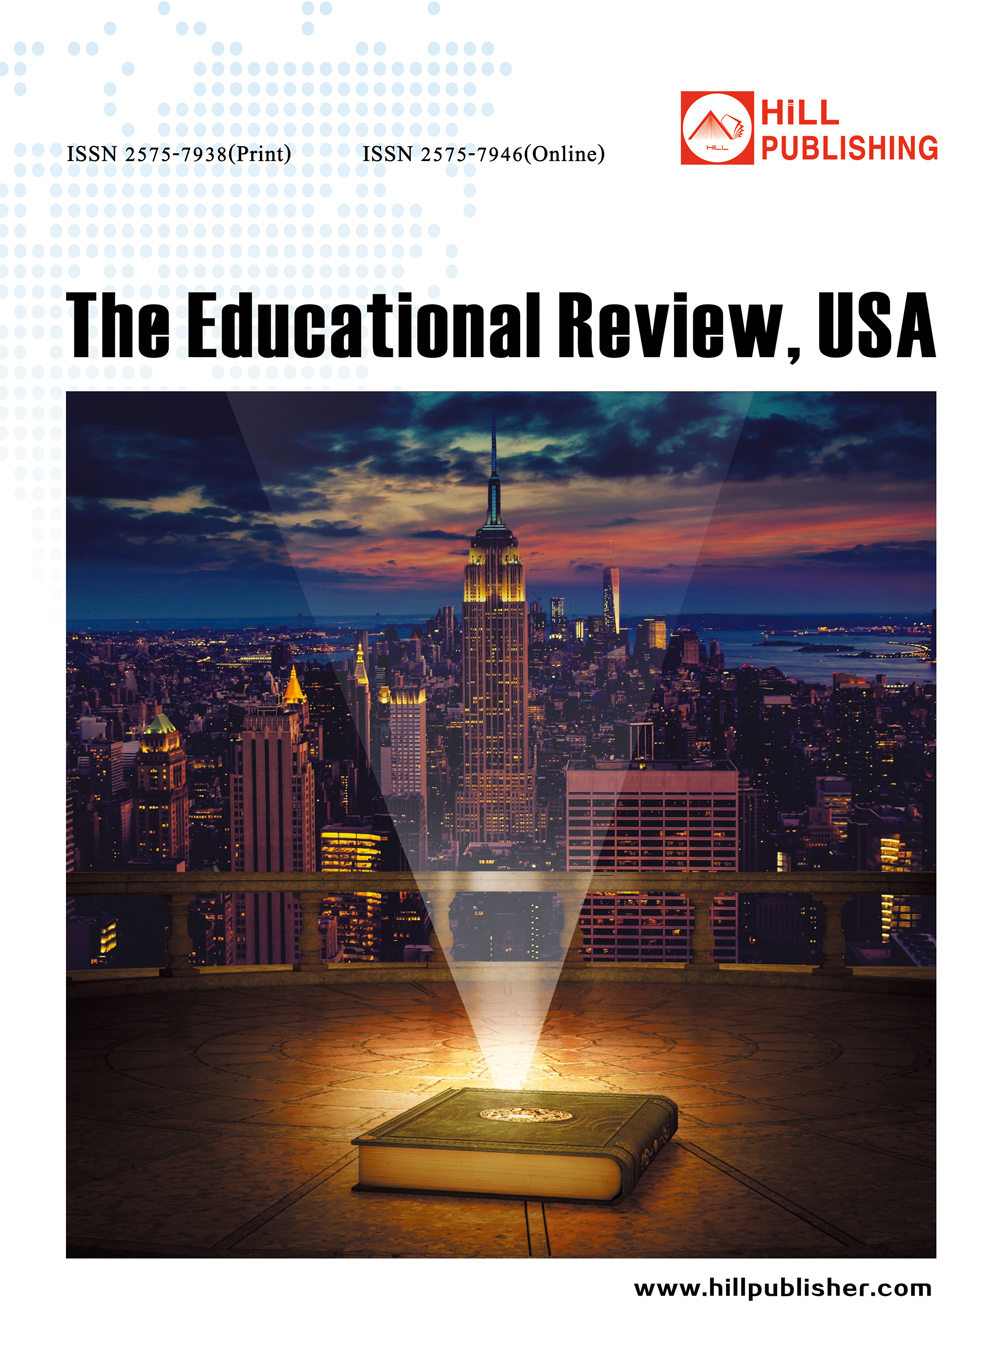 The Educational Review, USA（美国教育评论）